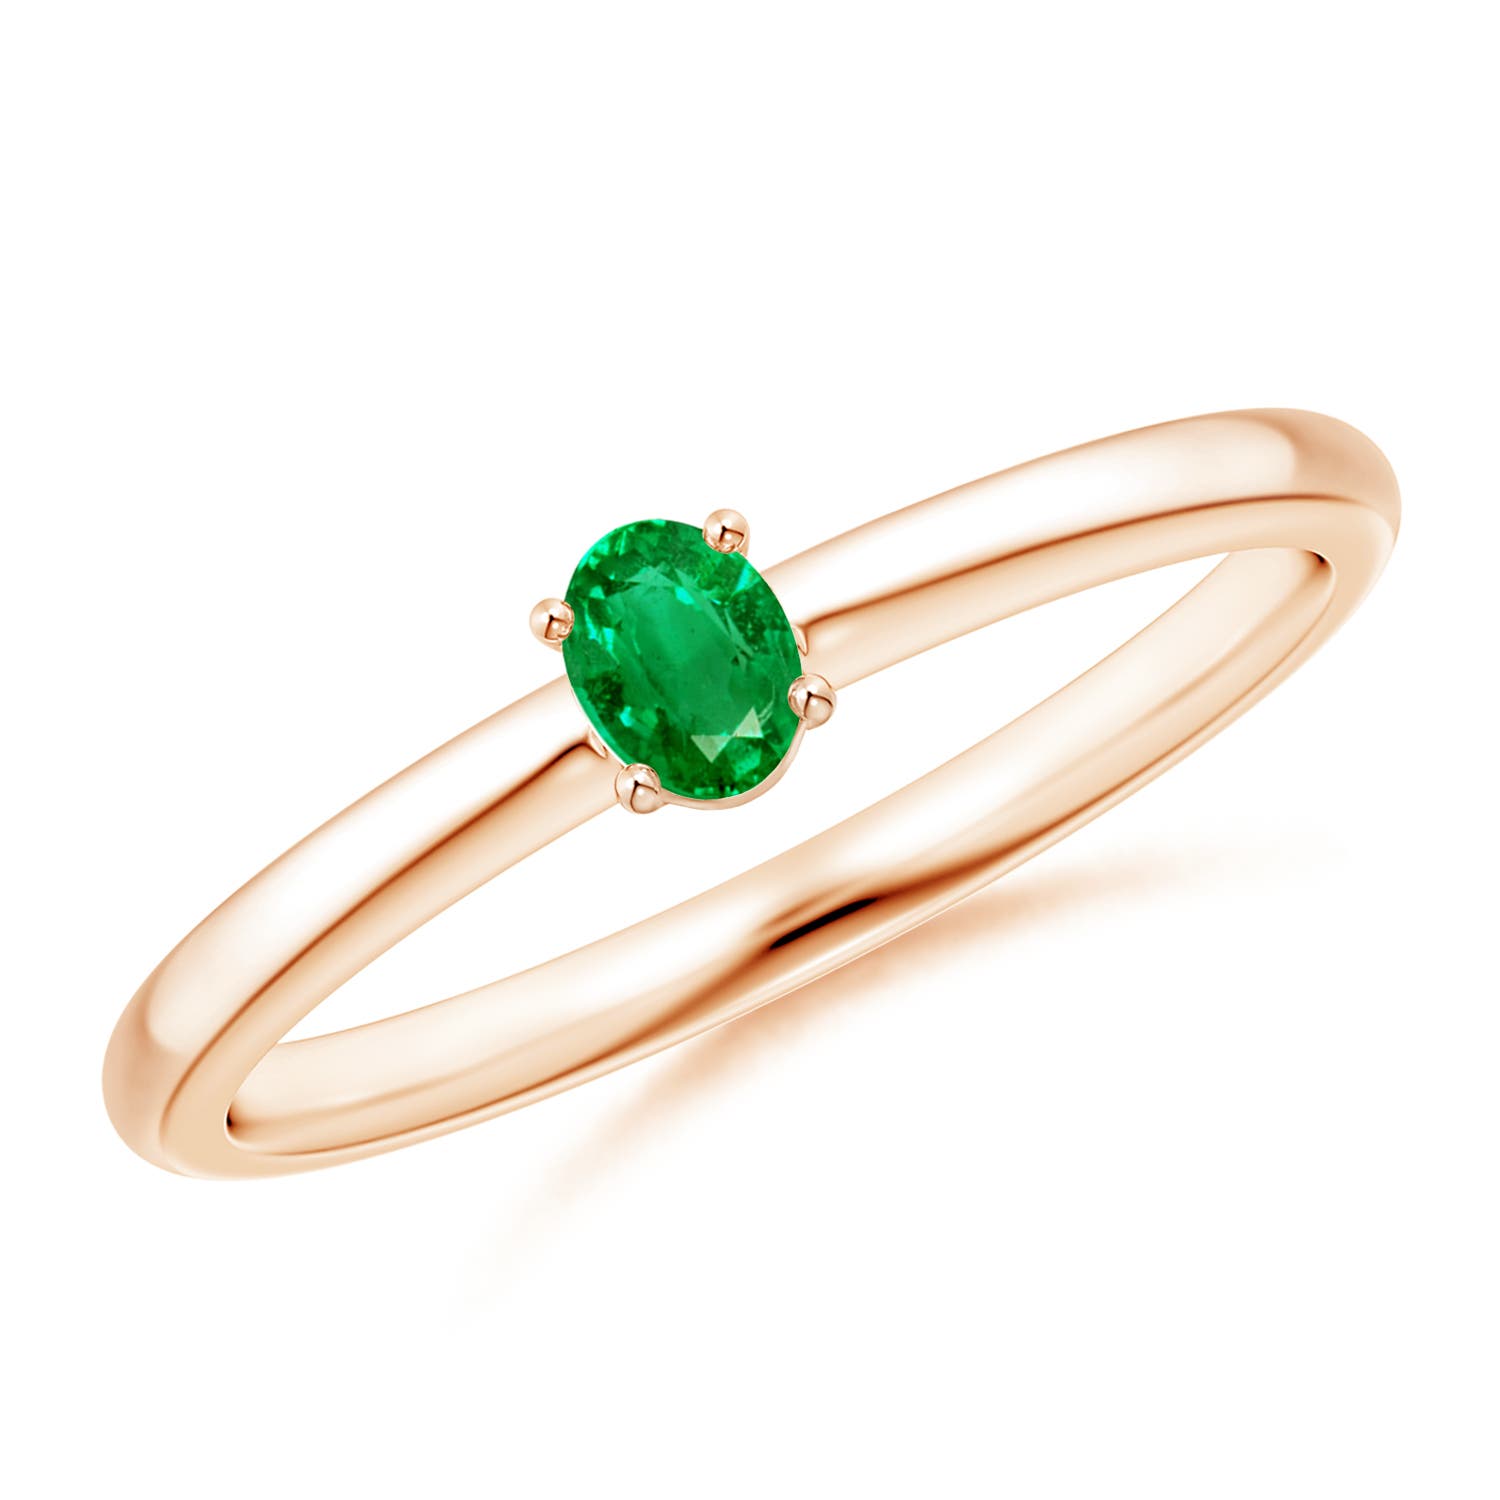 AAA - Emerald / 0.12 CT / 14 KT Rose Gold